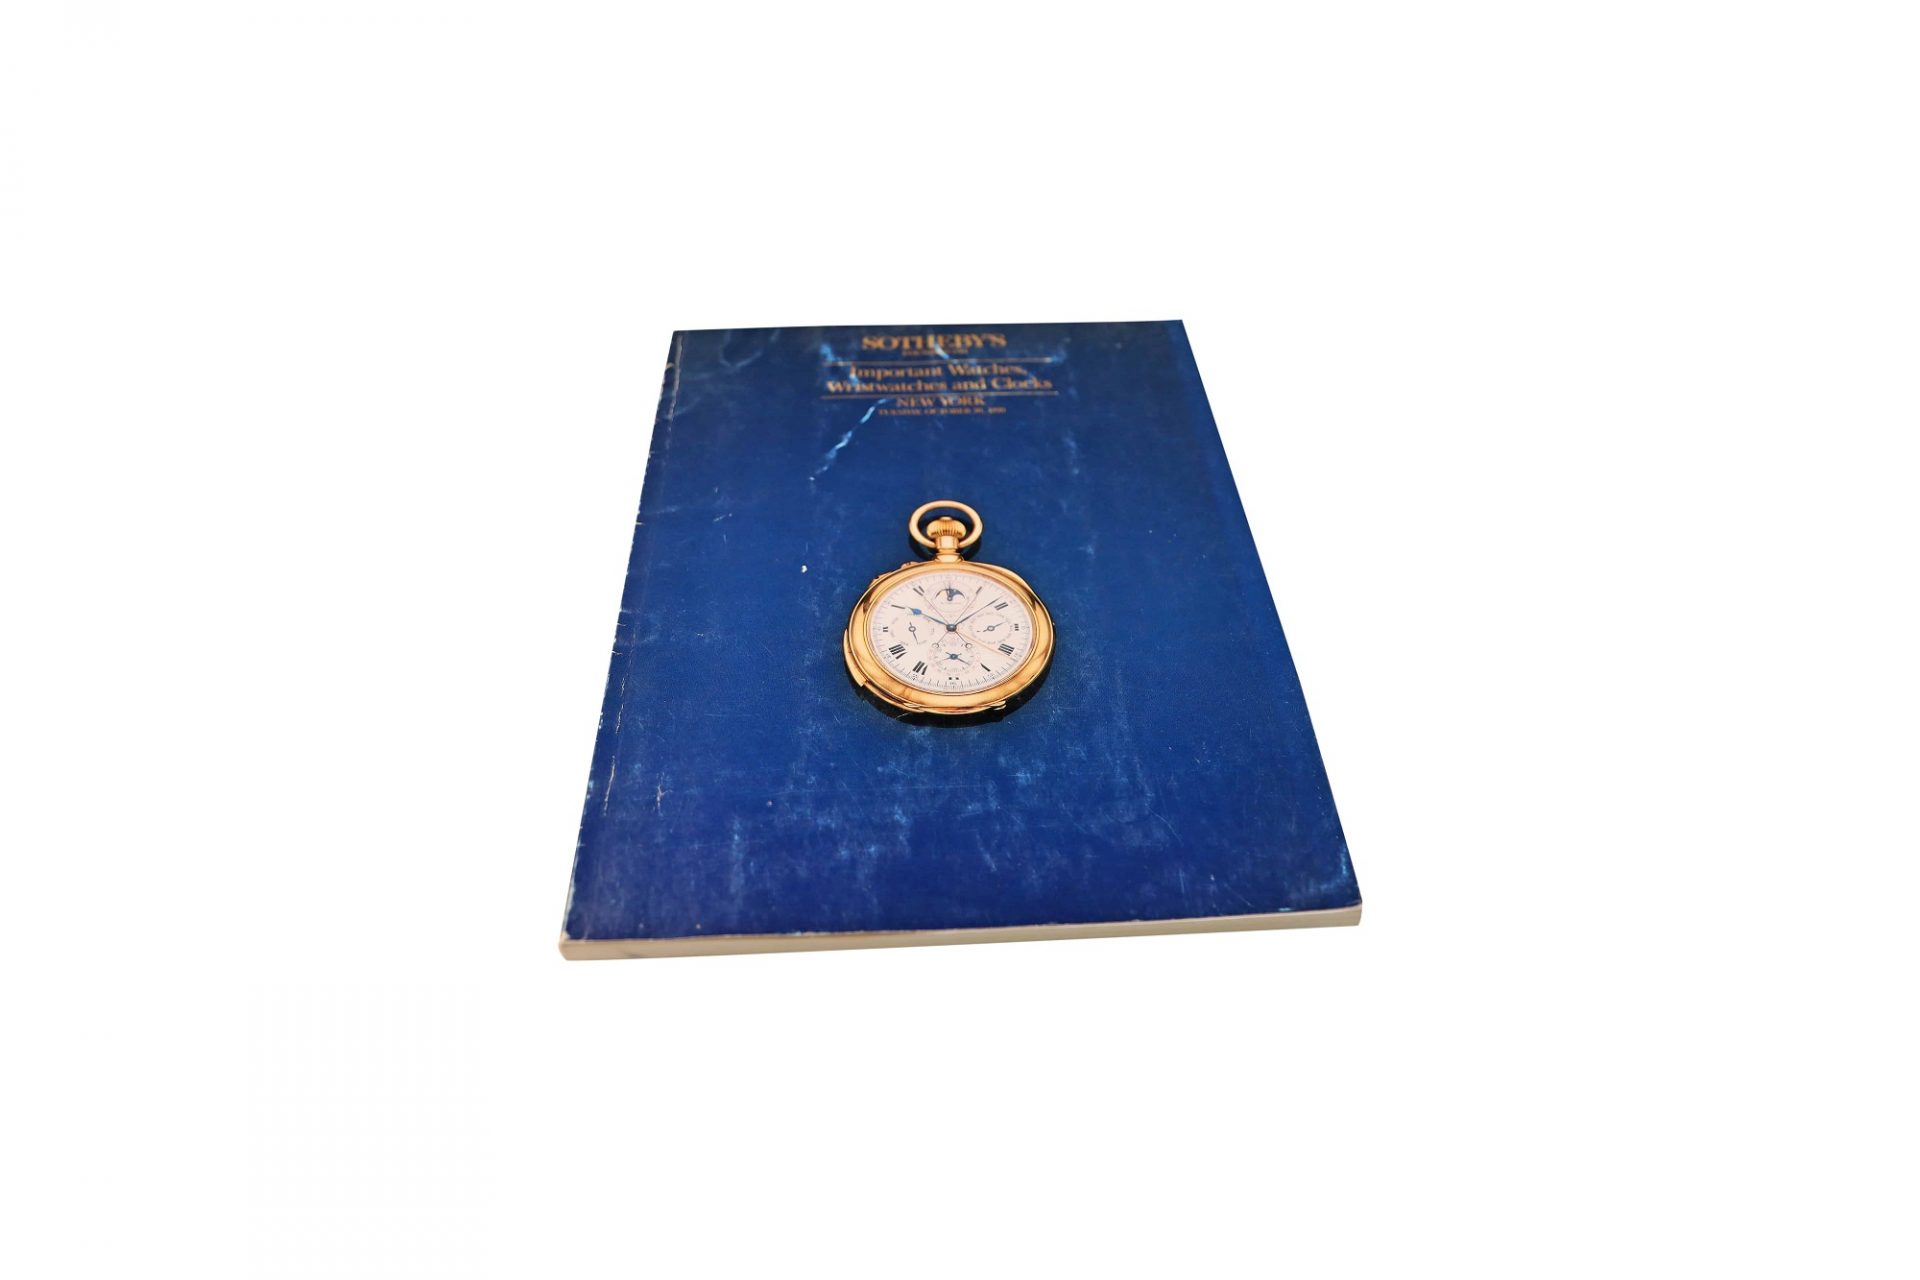 Sotheby's Important Watches, Wristwatch And Clocks New York Auction Catalog - Rare Watch Parts